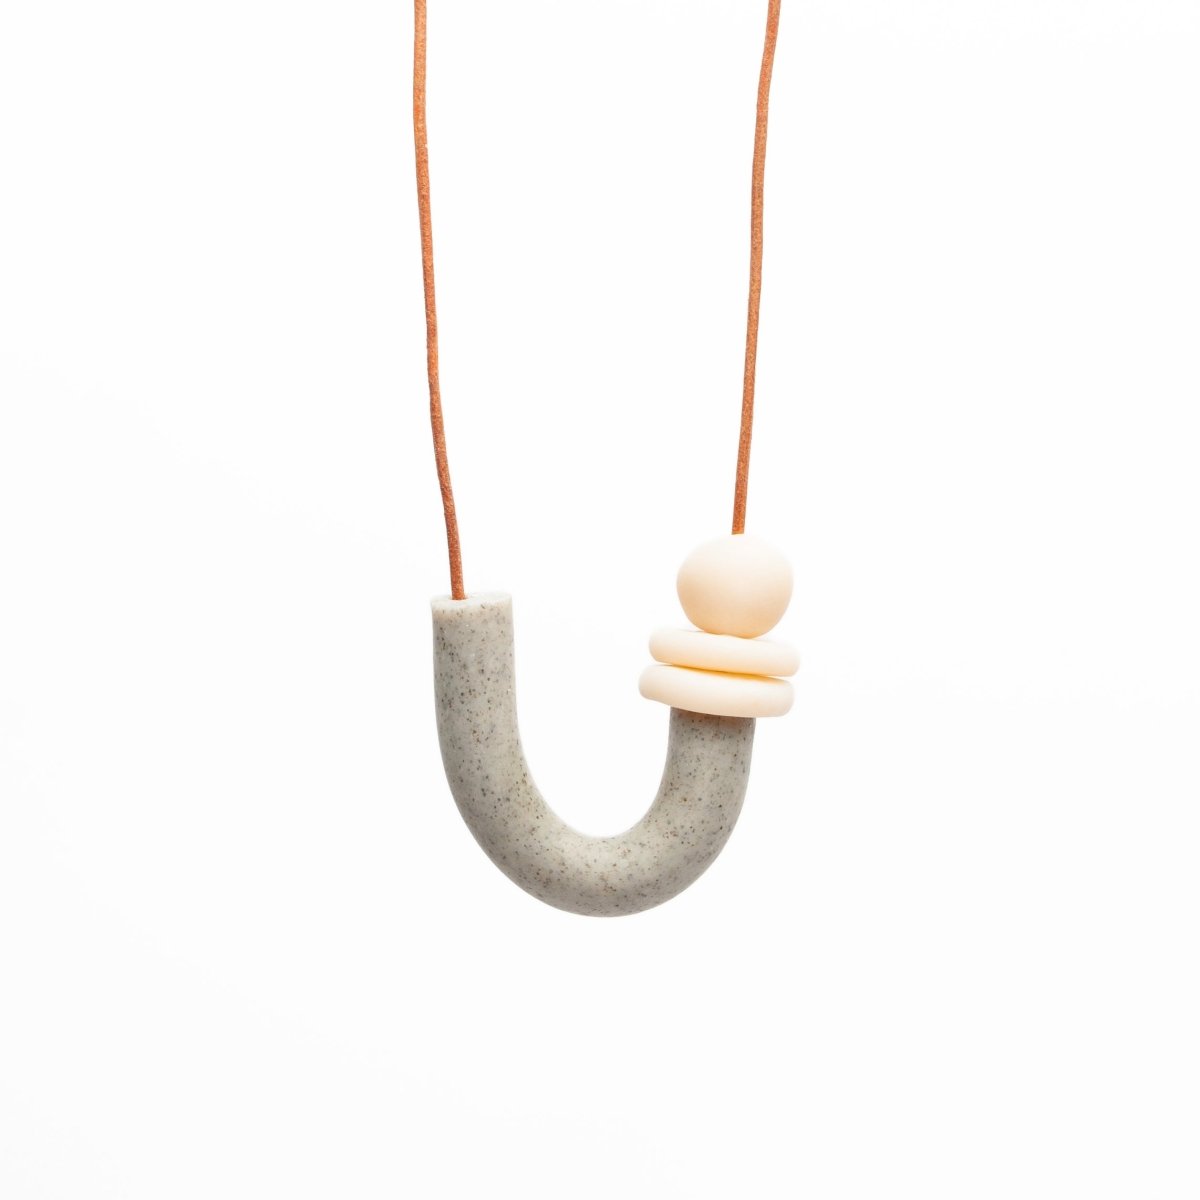 U shaped necklace made of polymer clay and orange leather cord. Made in Los Angeles, California by Hey Moon Designs.